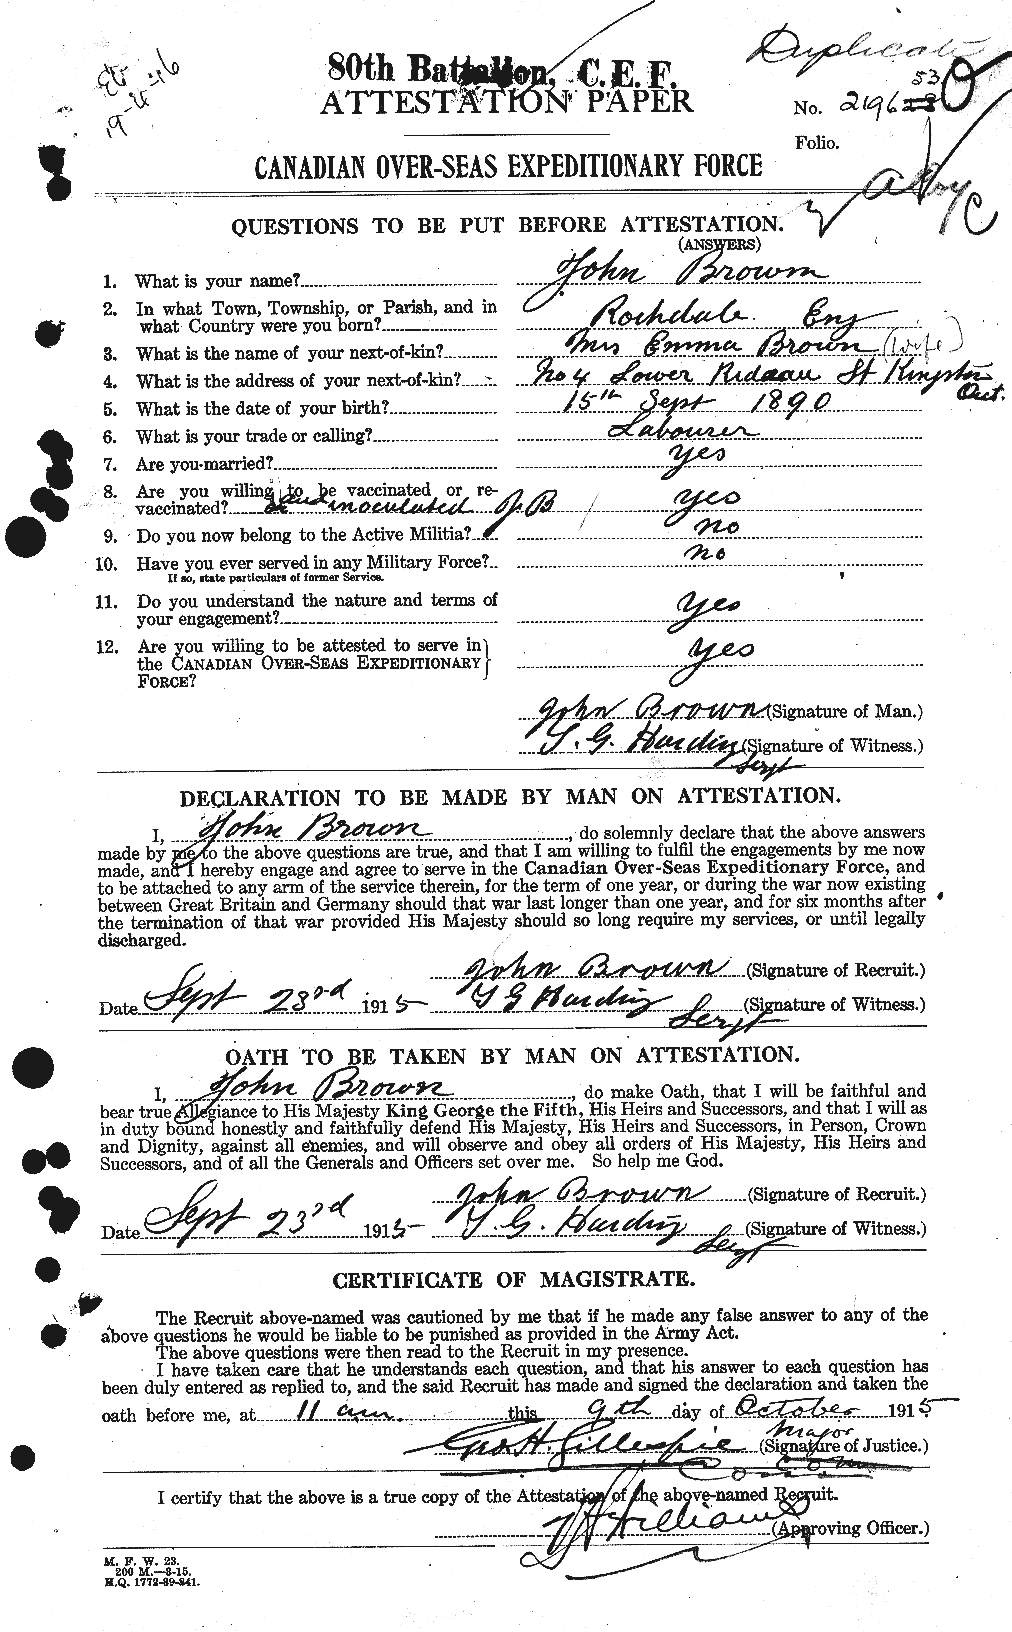 Personnel Records of the First World War - CEF 269633a